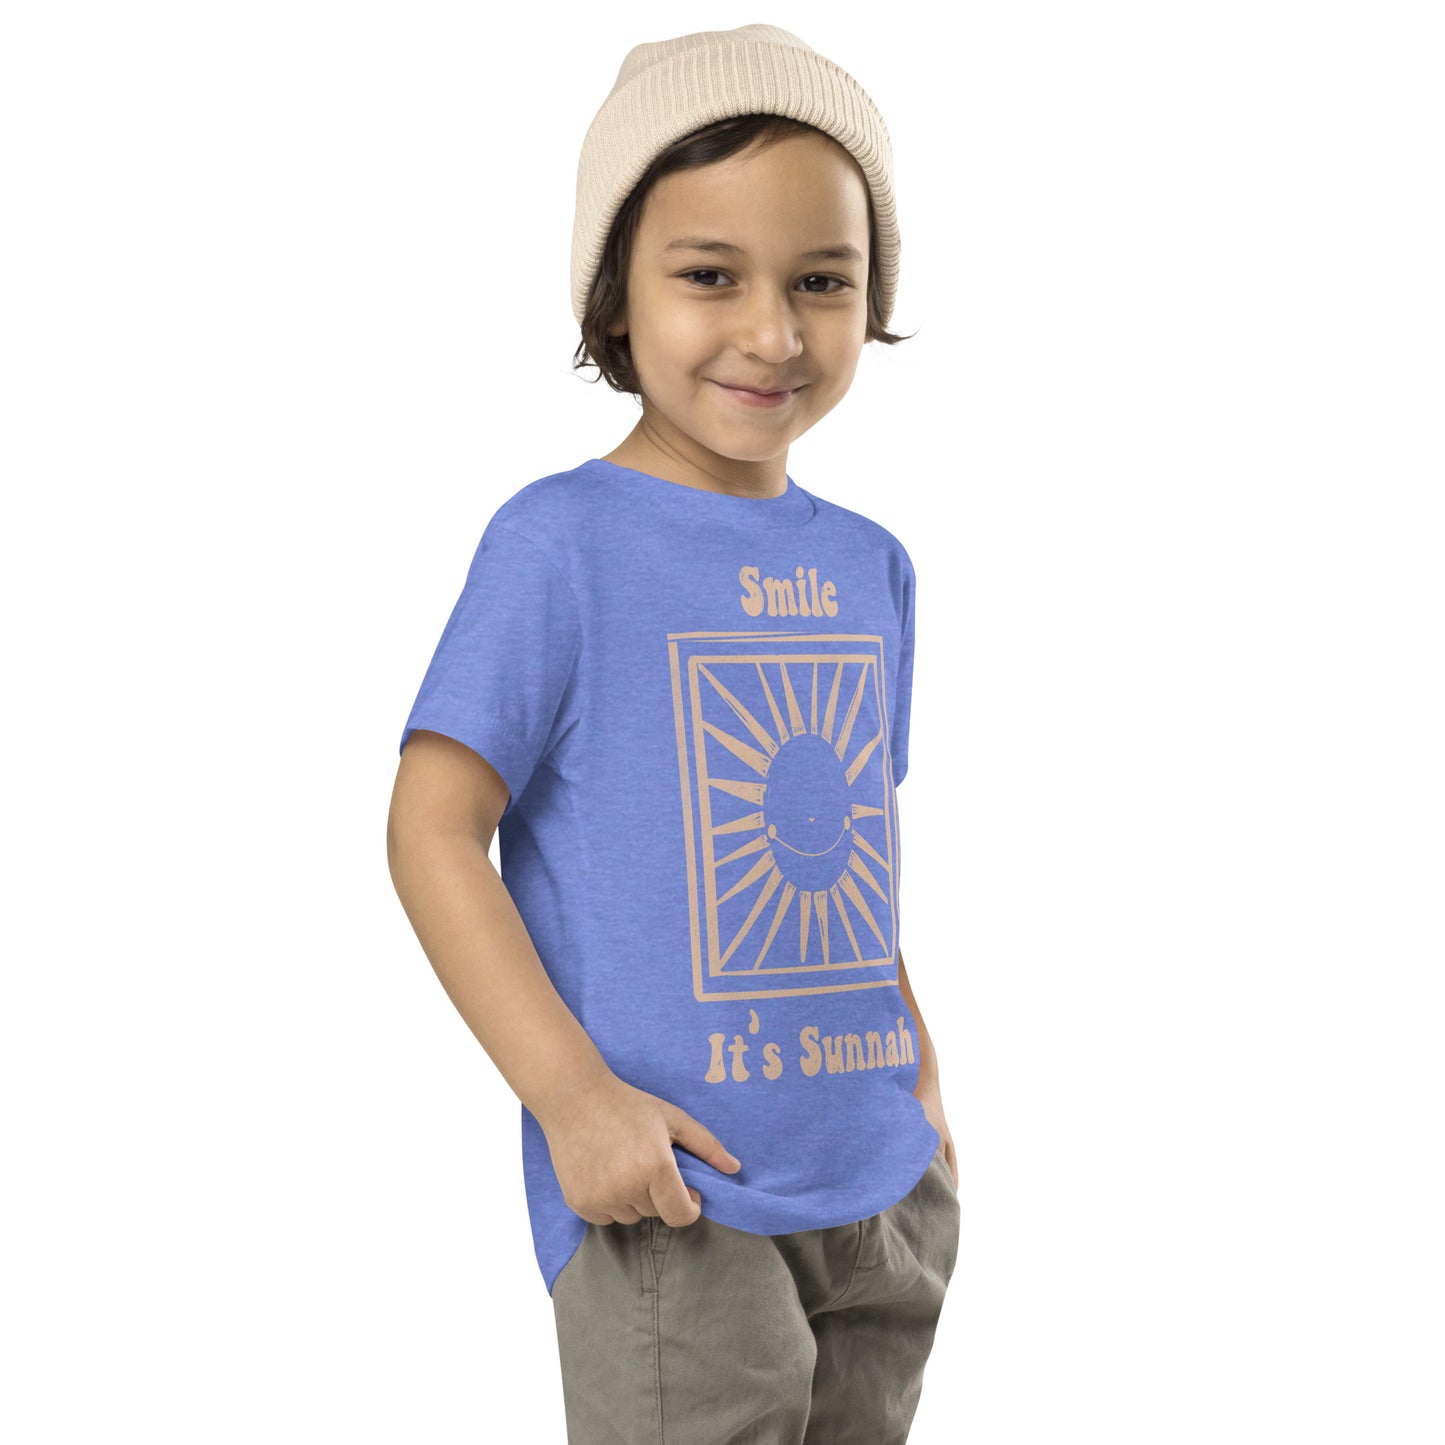 Youth & Toddler Short Sleeve Tee Smile it’s Sunnah black and blue